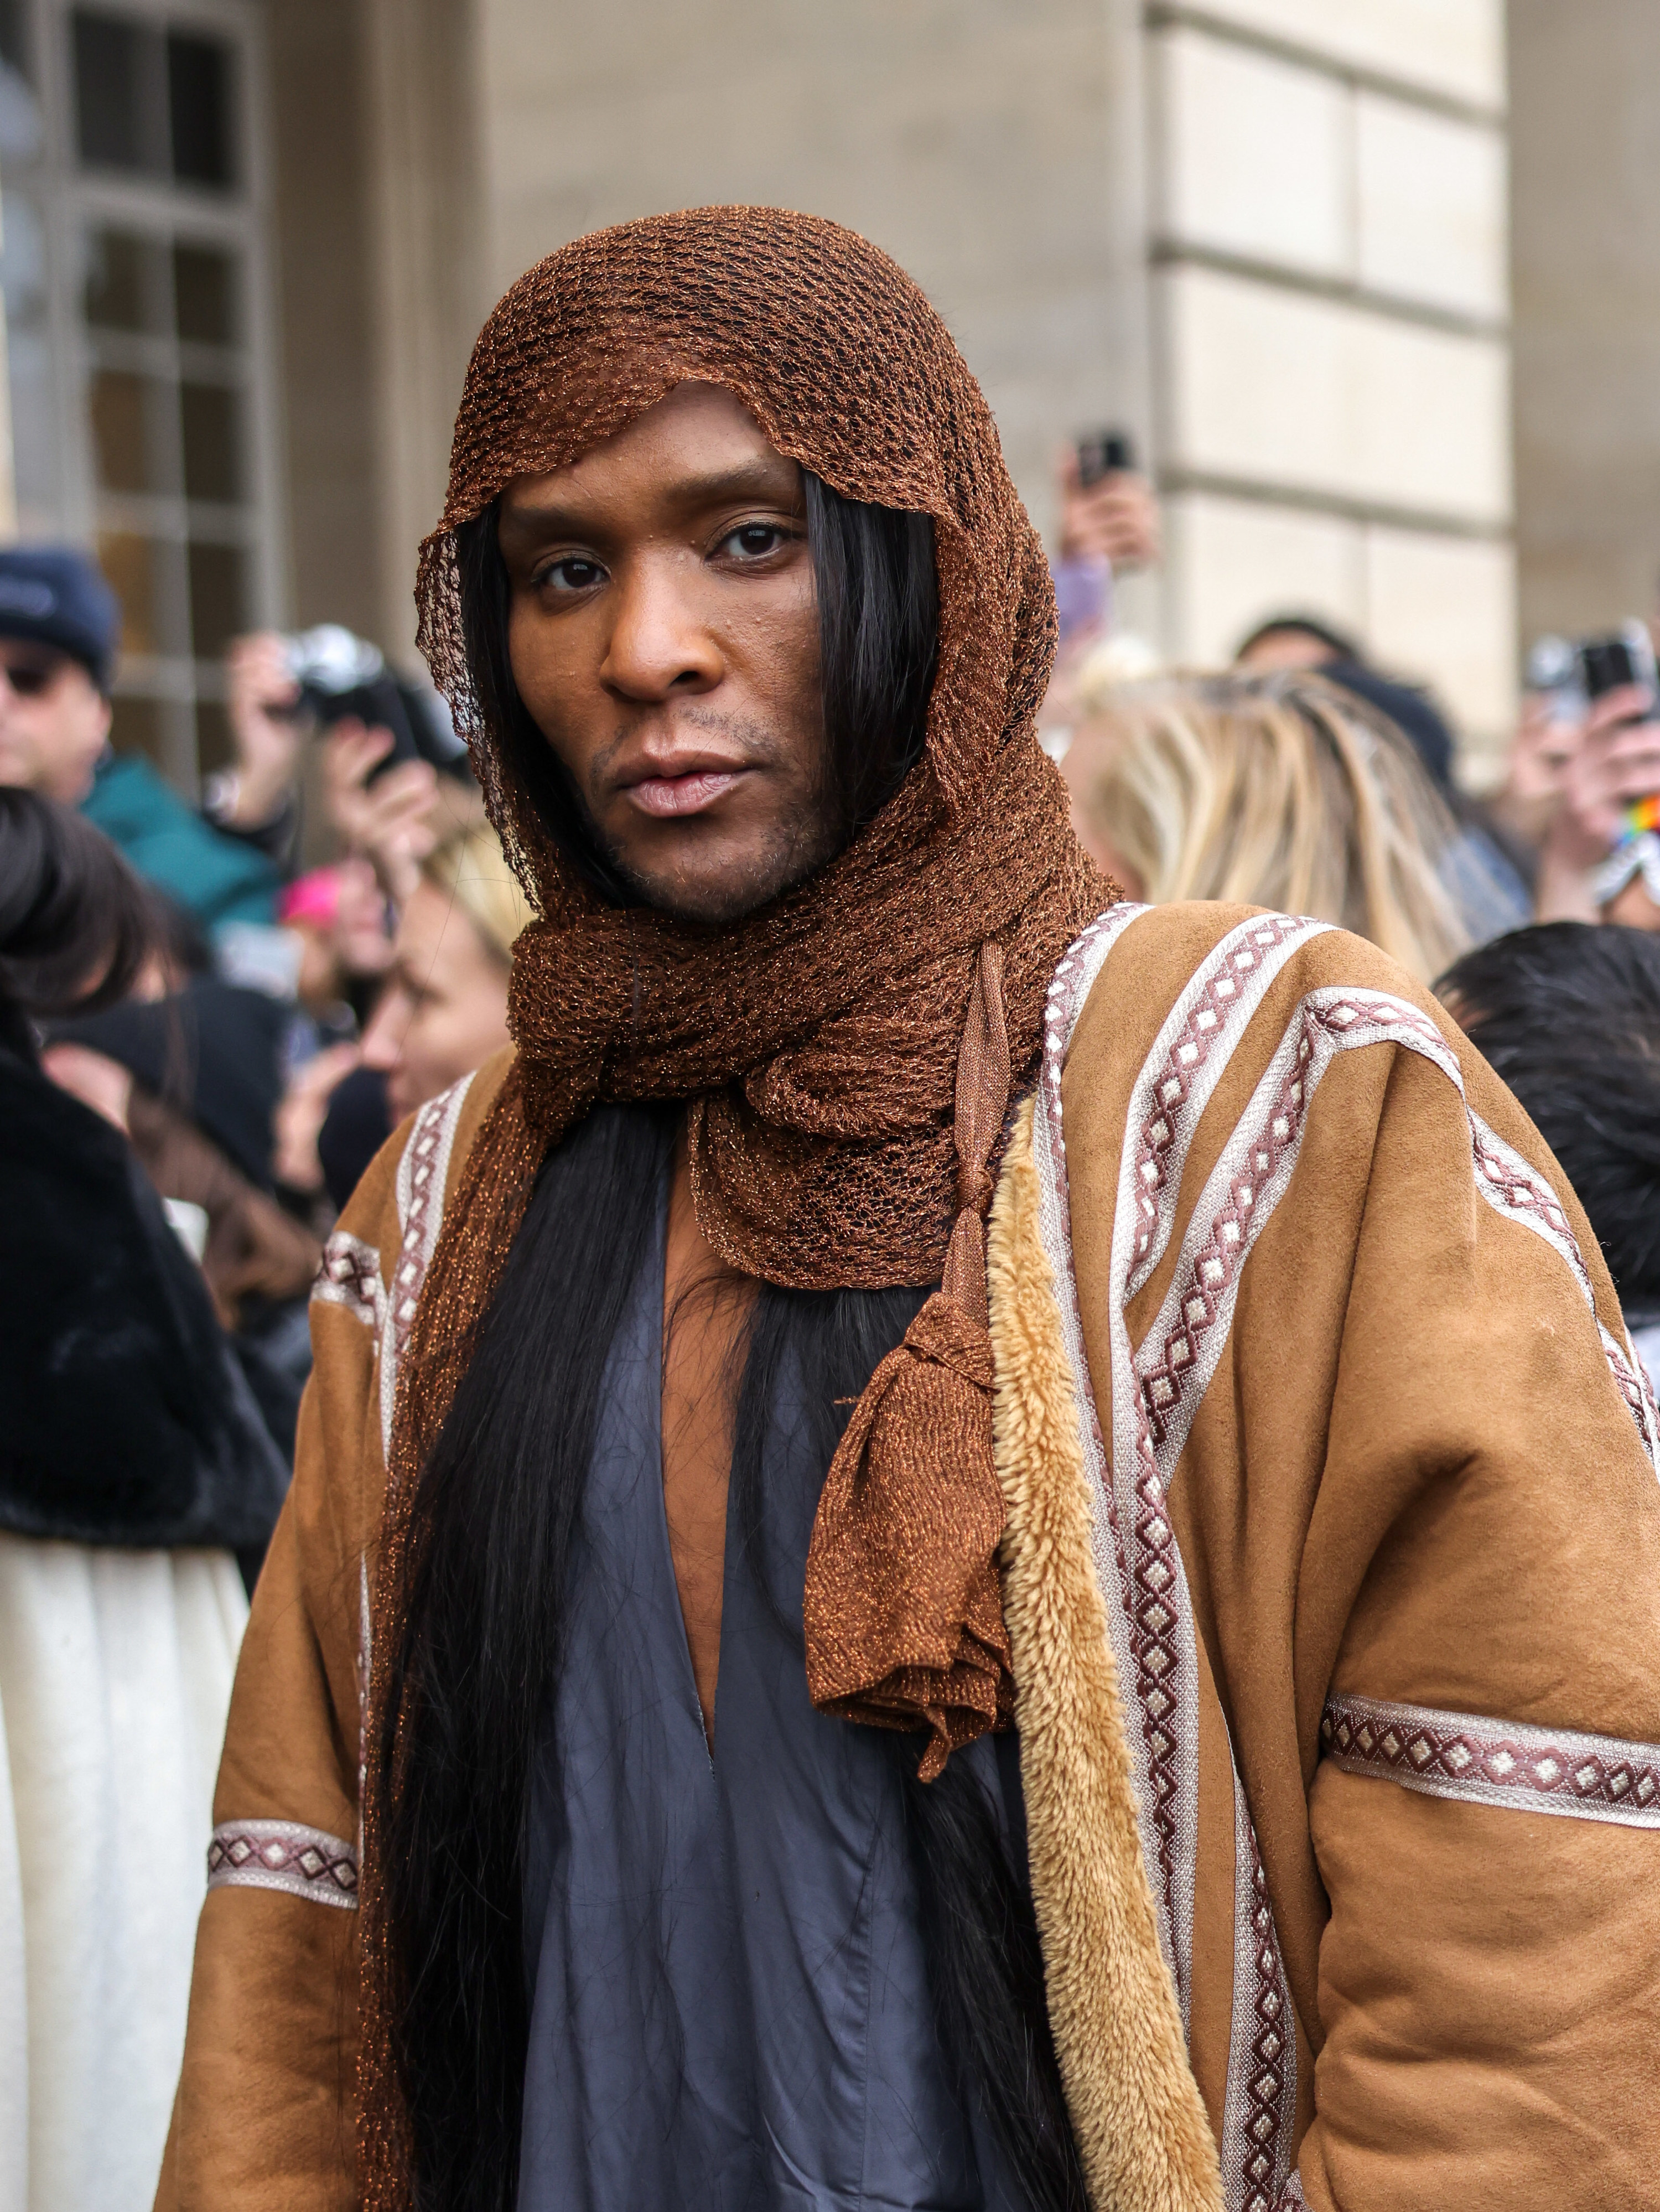 Law Roach looks into the camera, wearing a brown headscarf and full high-fashion outfit outside at an event